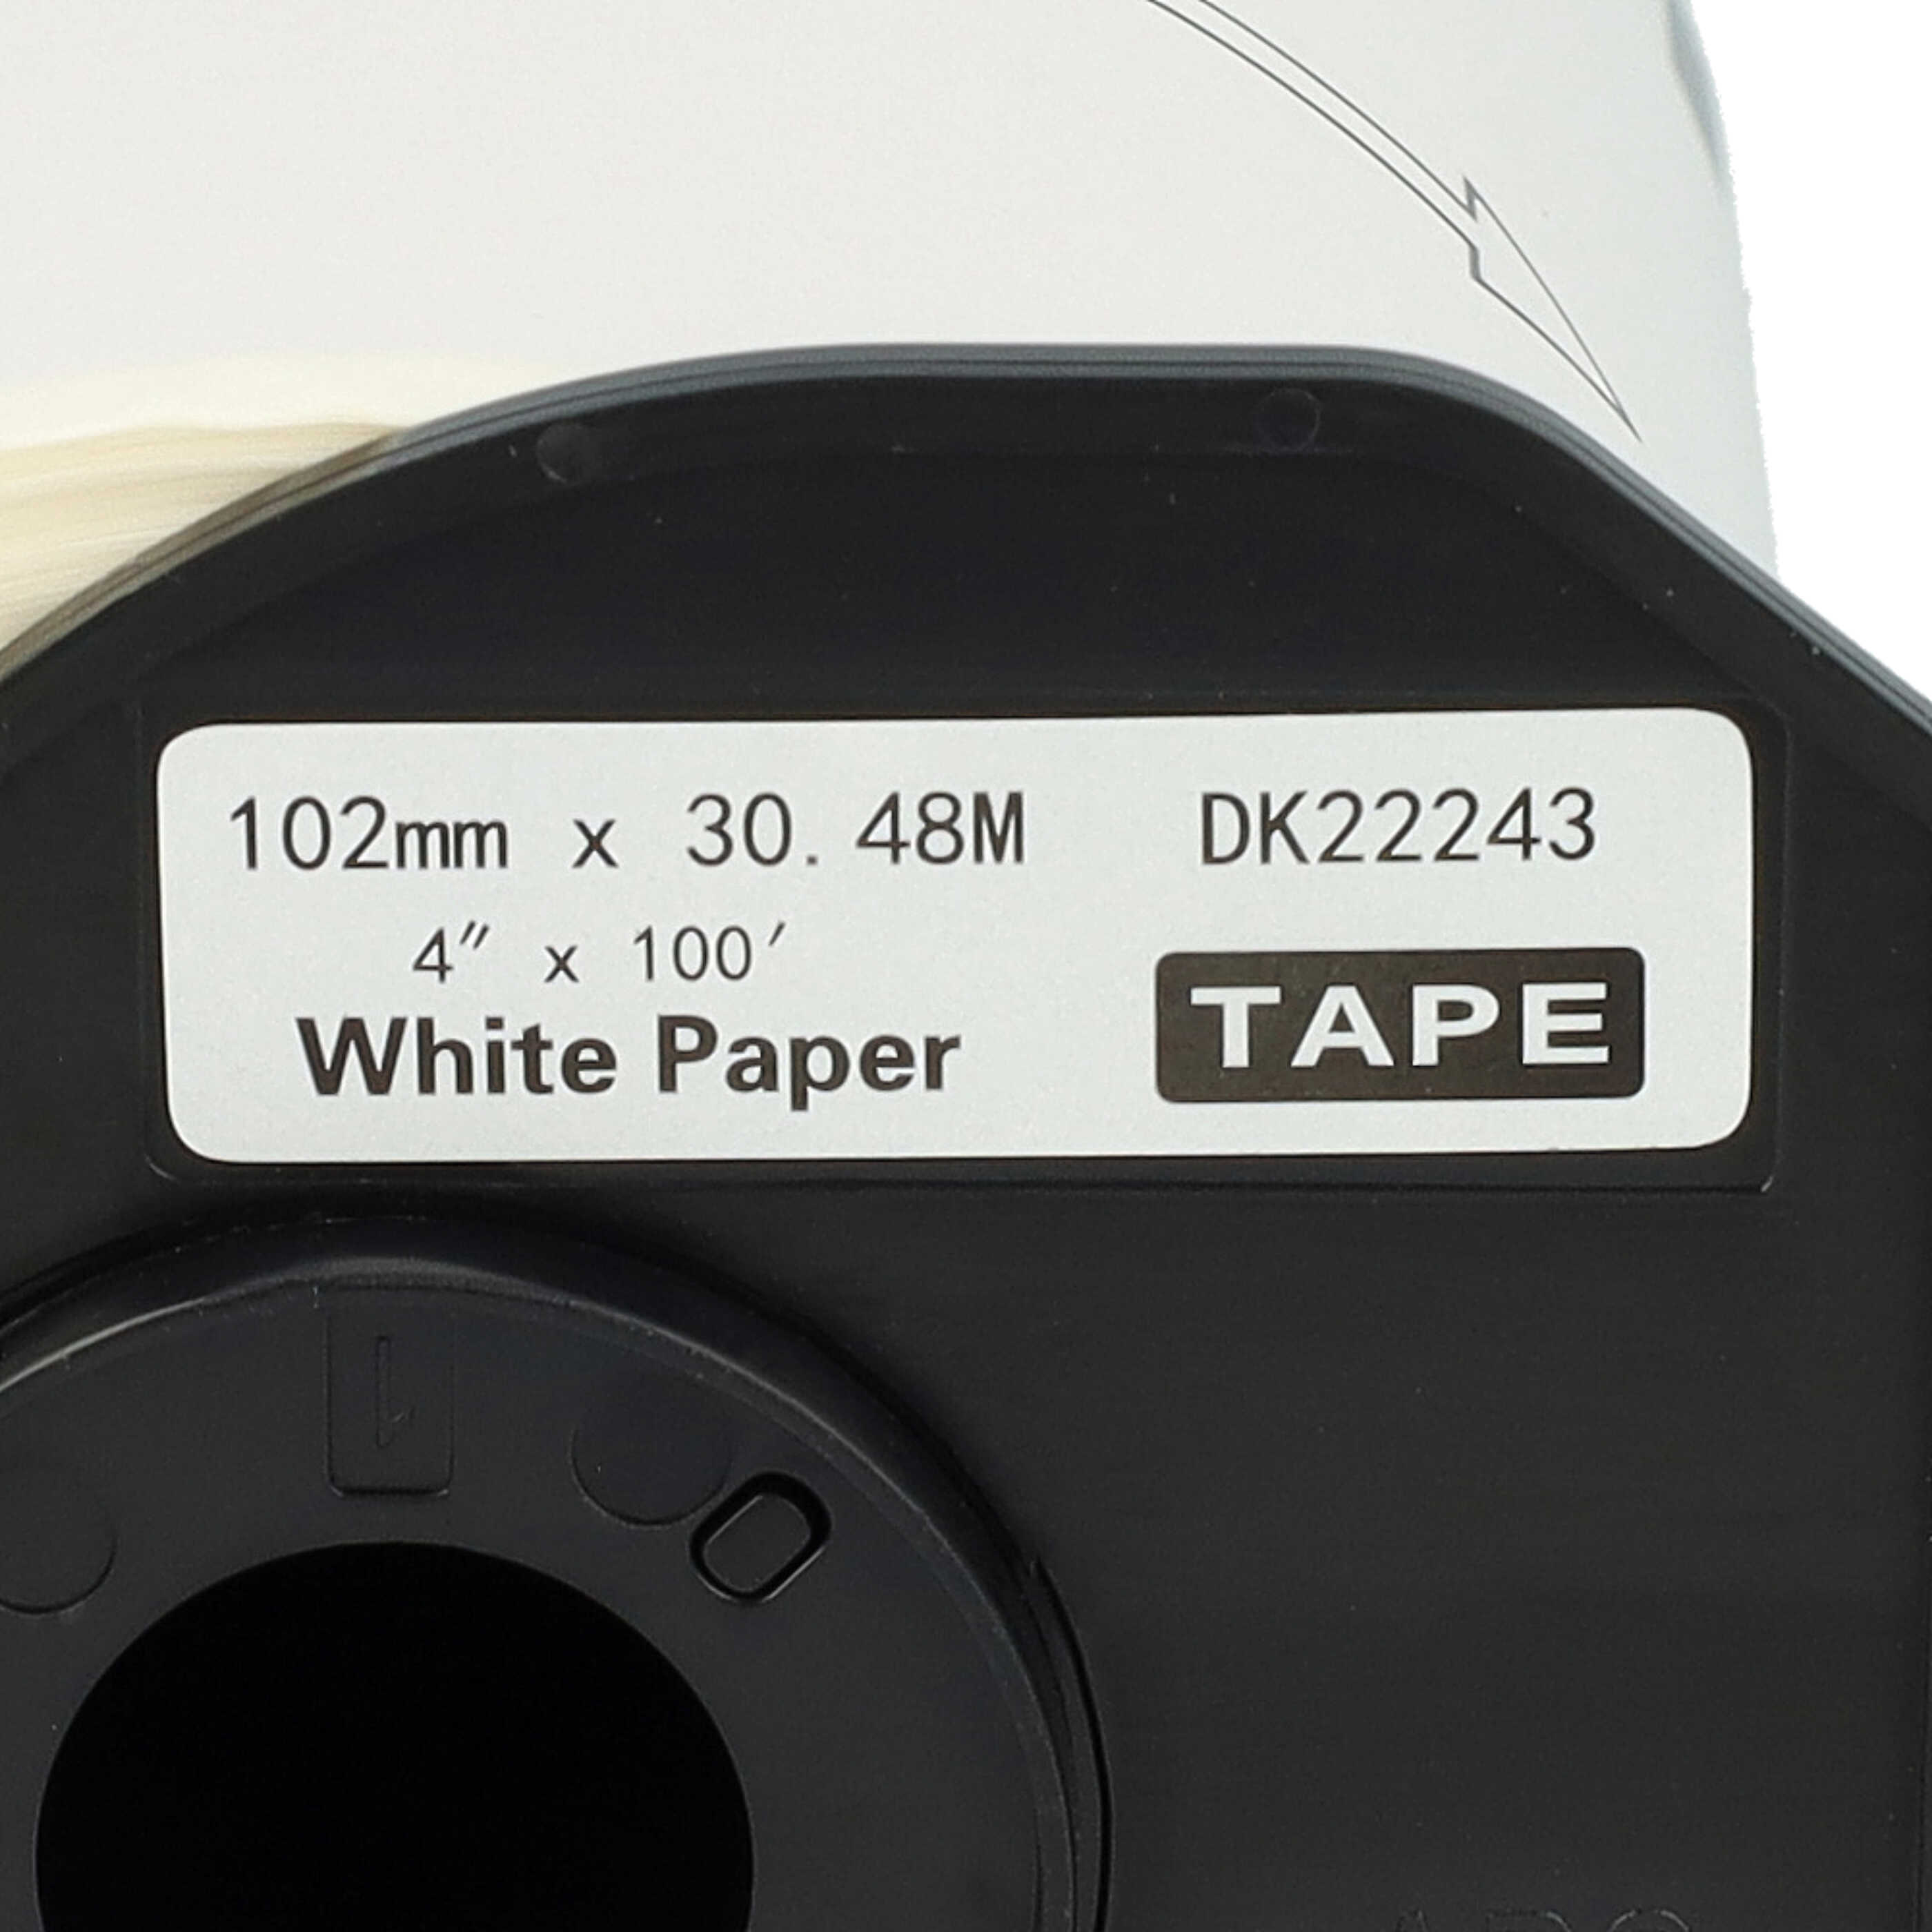 Labels replaces Brother DK-22243 for Labeller - 102 mm x 30.48m + Holder